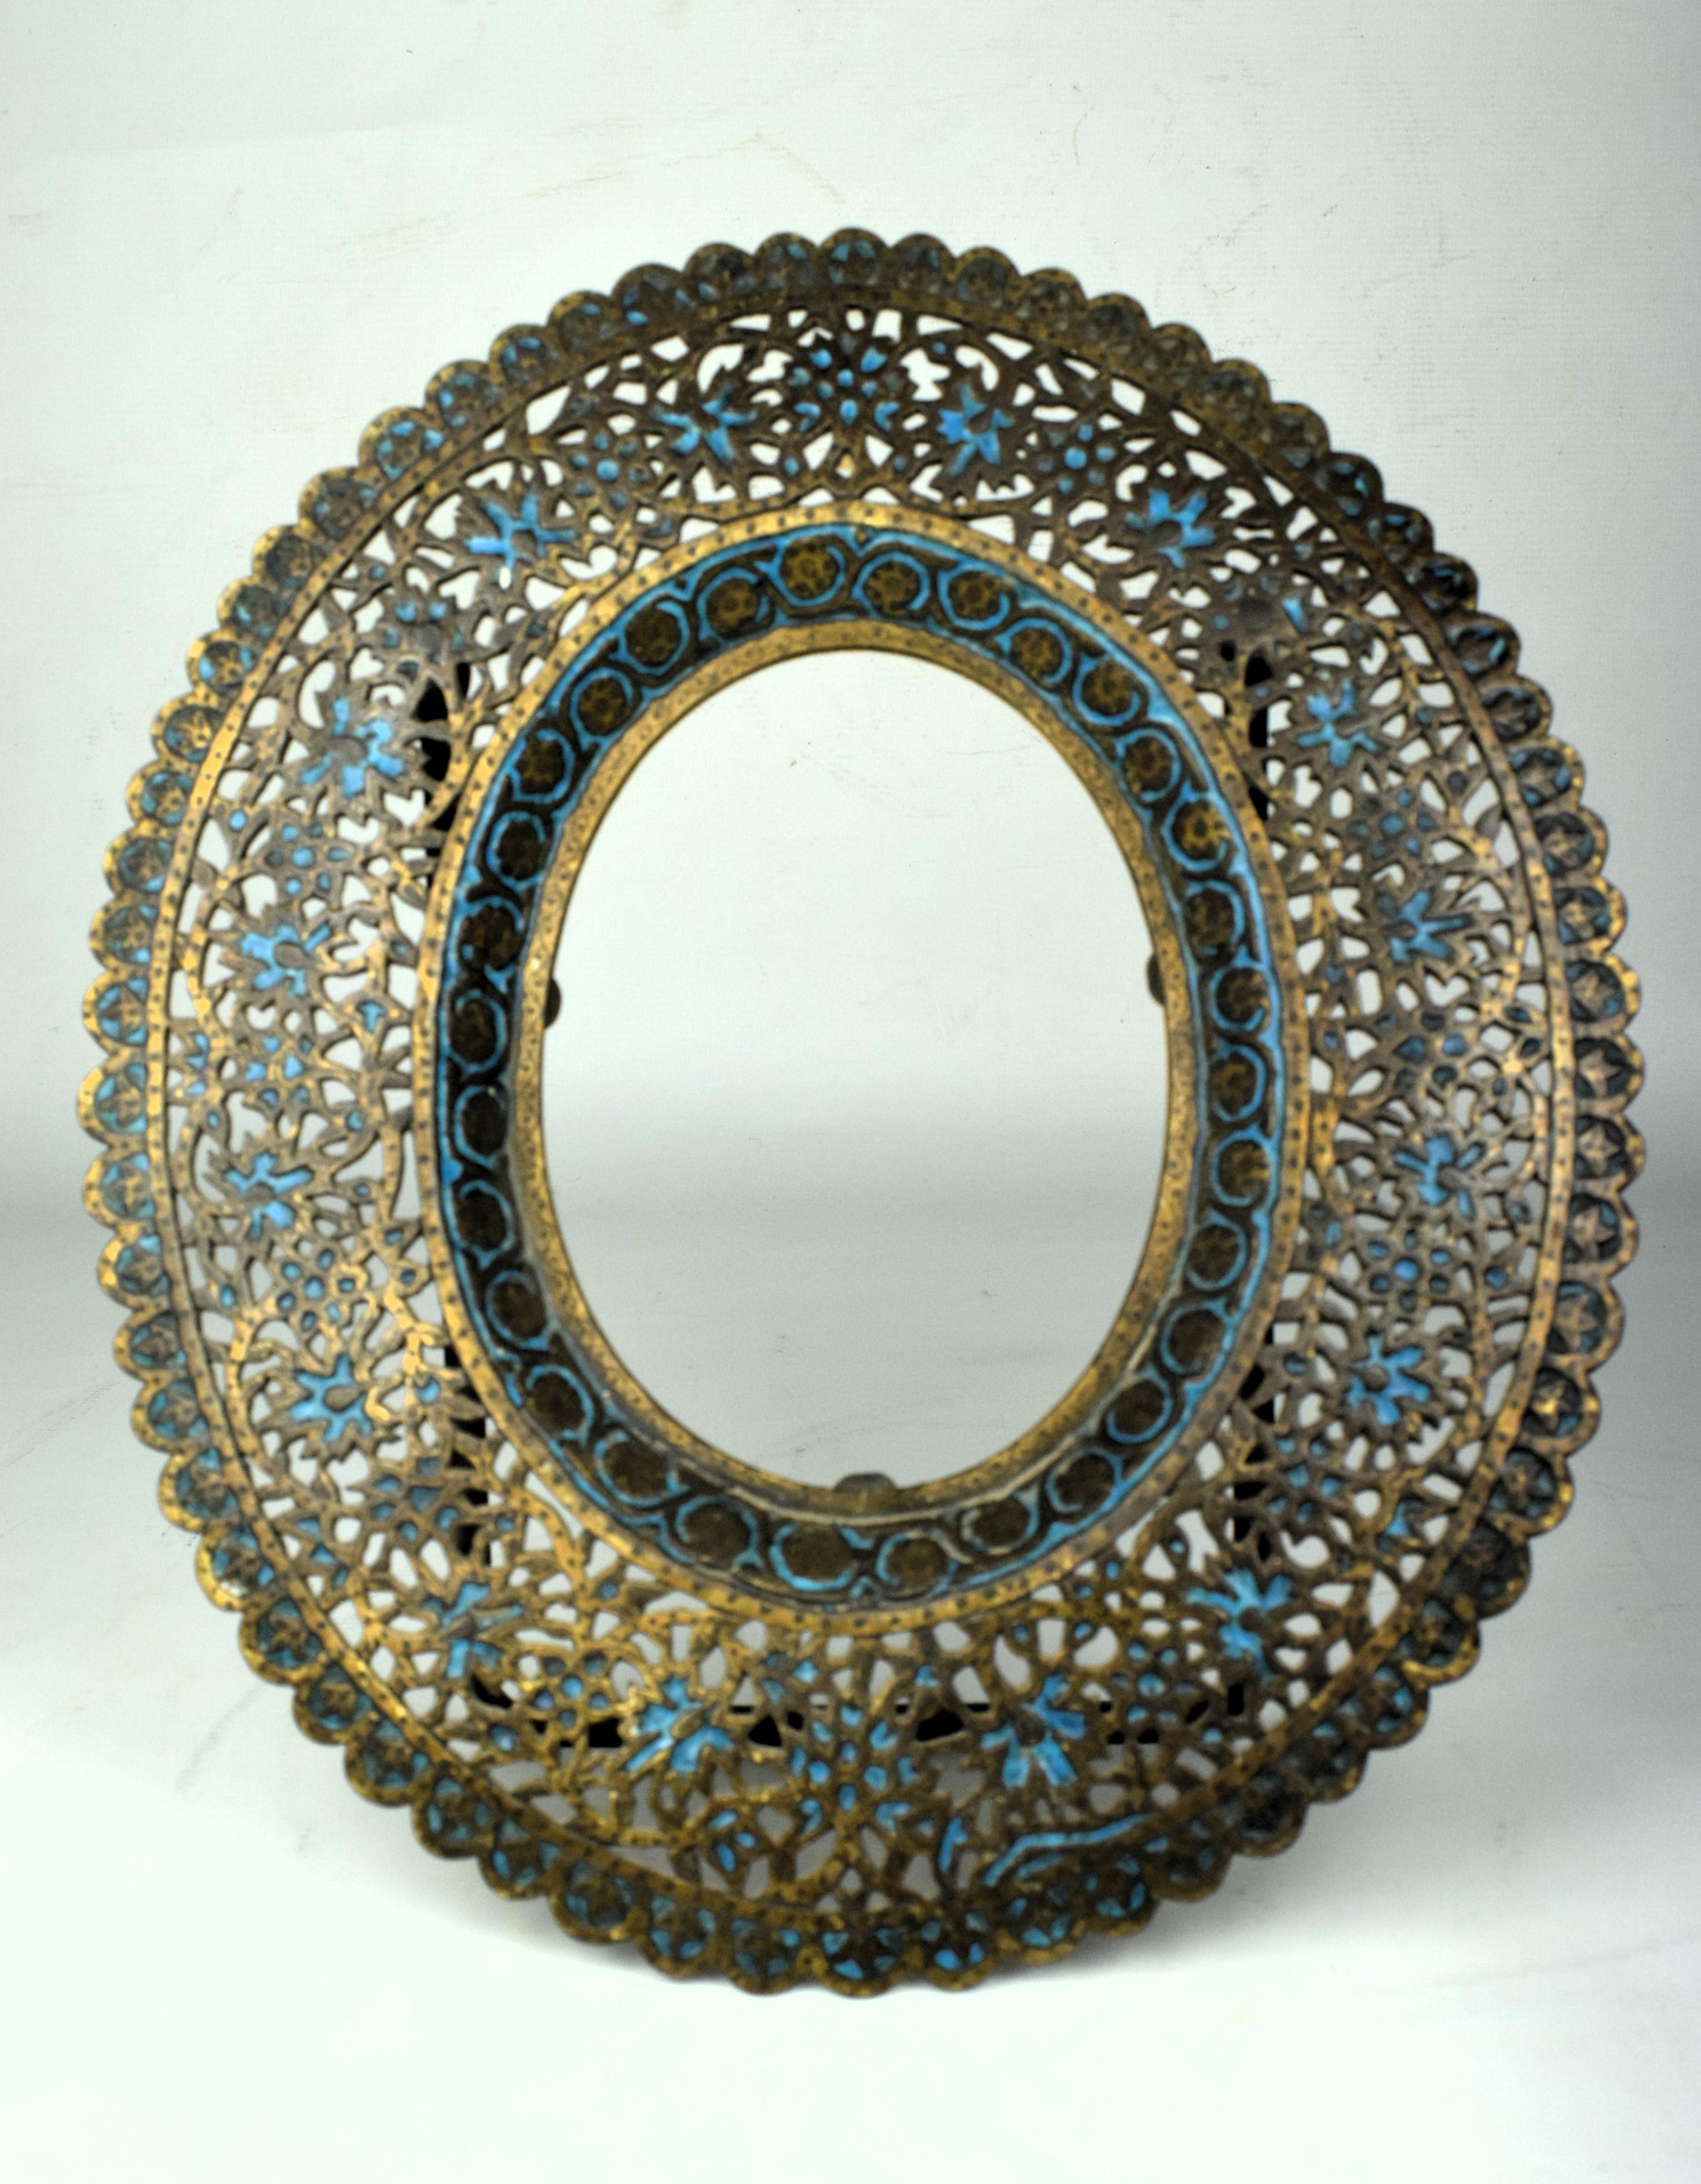 Crafted in the early 19th century, this Kashmiri brass cutwork enameled frame is a stunning example of the region's artistic prowess. The frame is made from high-quality brass, providing a durable and lustrous foundation for the intricate detailing